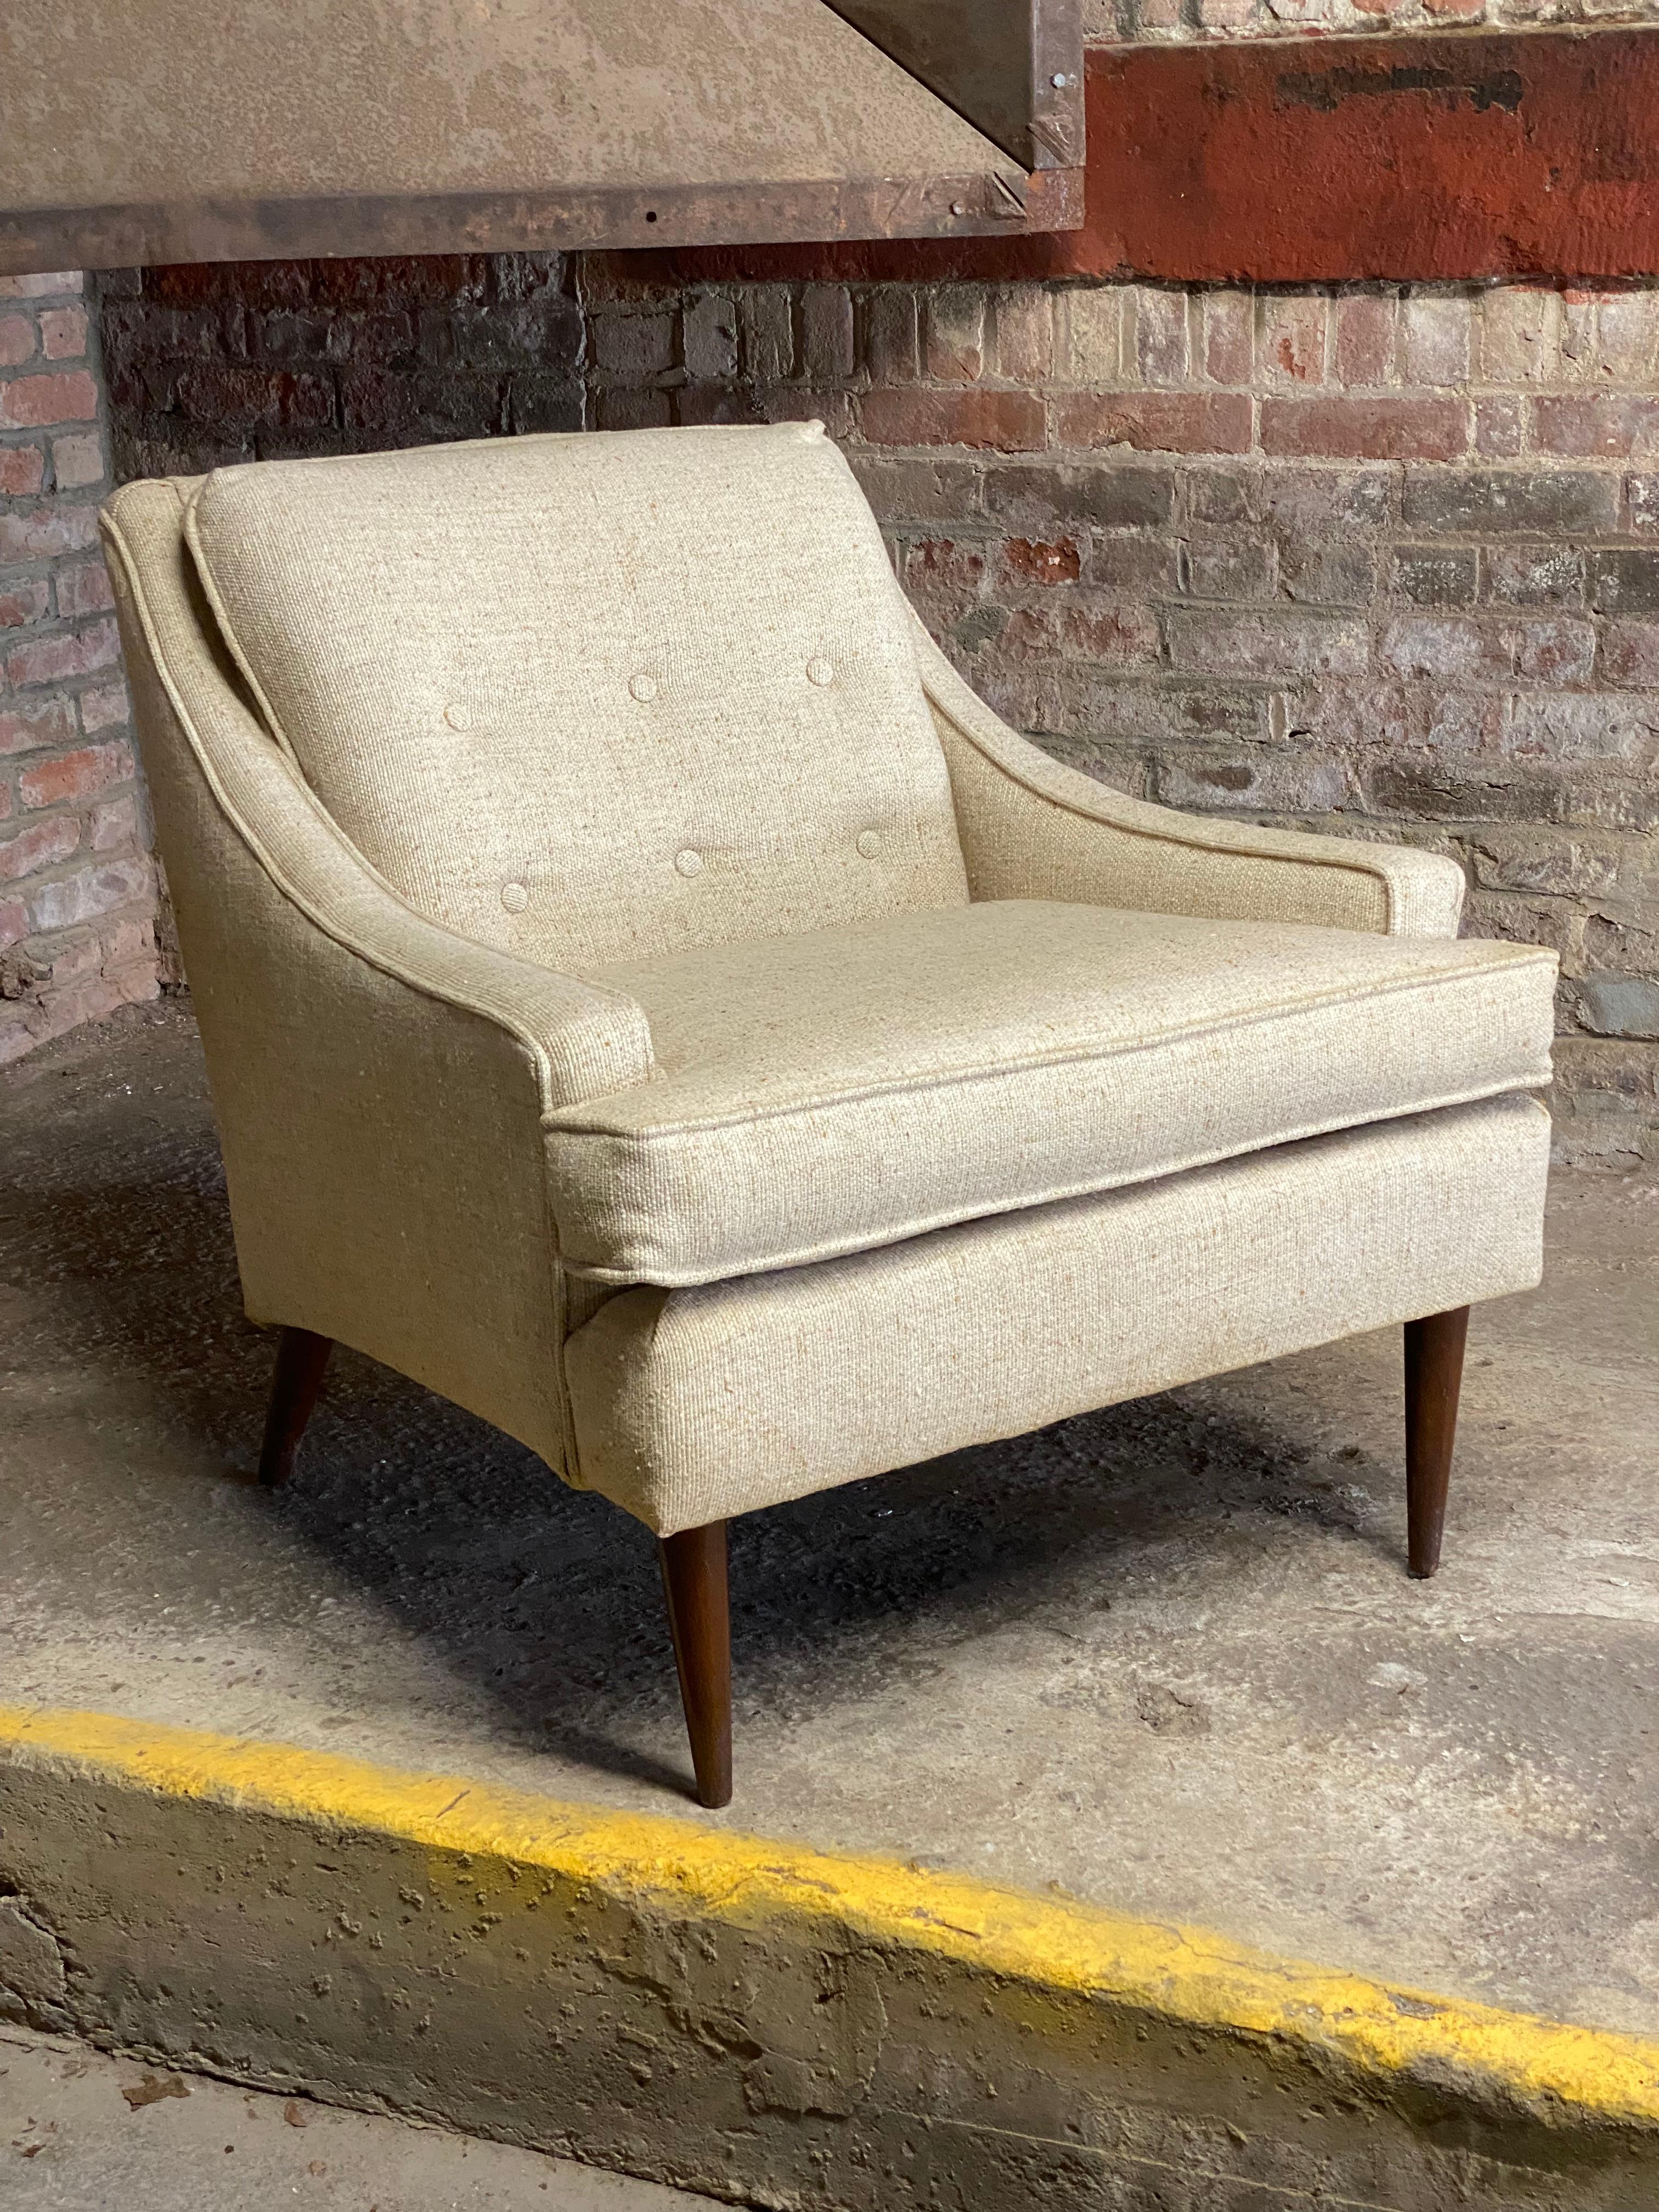 A fine Mid-Century Modern low slung arm chair with tapered and flared wood legs. Six button back with a loose cushion seat. Circa 1960-70. A good quality chair with very nice lines. The chair was reupholstered in the late 1980s in a heavy duty